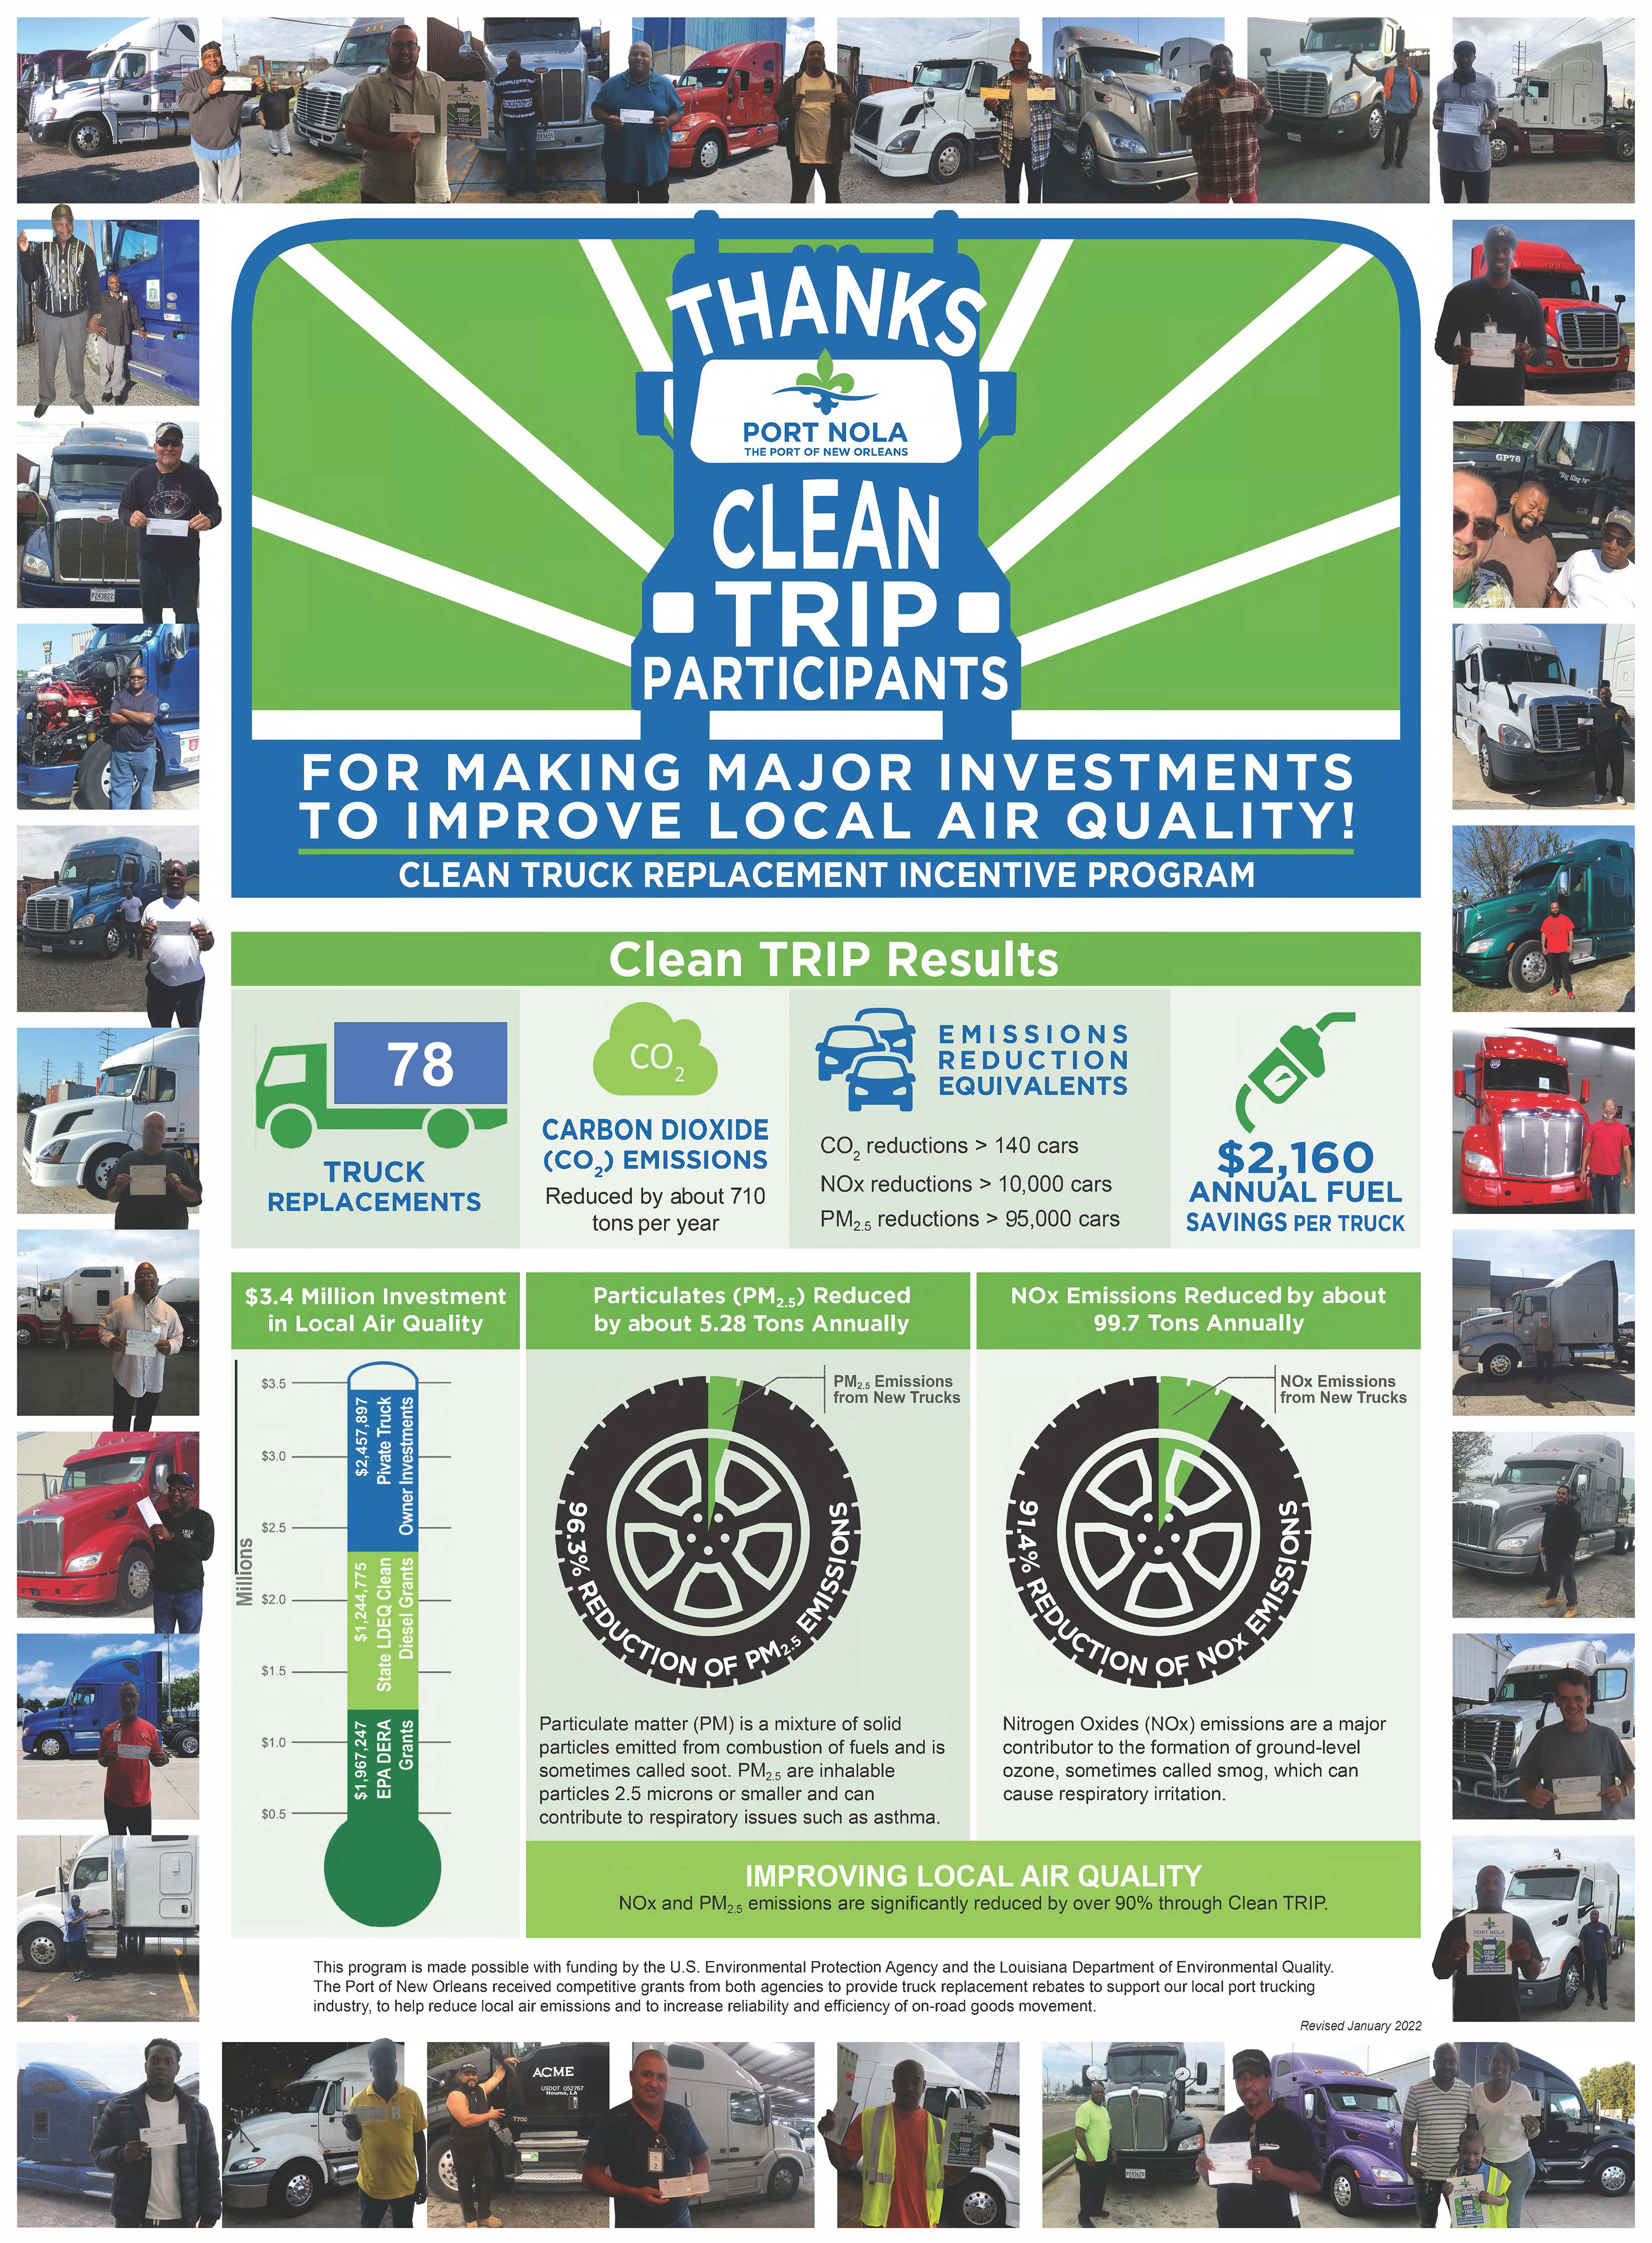 Graphic showing results of the Clean TRIP program as of January 2022, including truck replacements, reduction in carbon dioxide emissions, fuel savings, and investments in local air quality. 